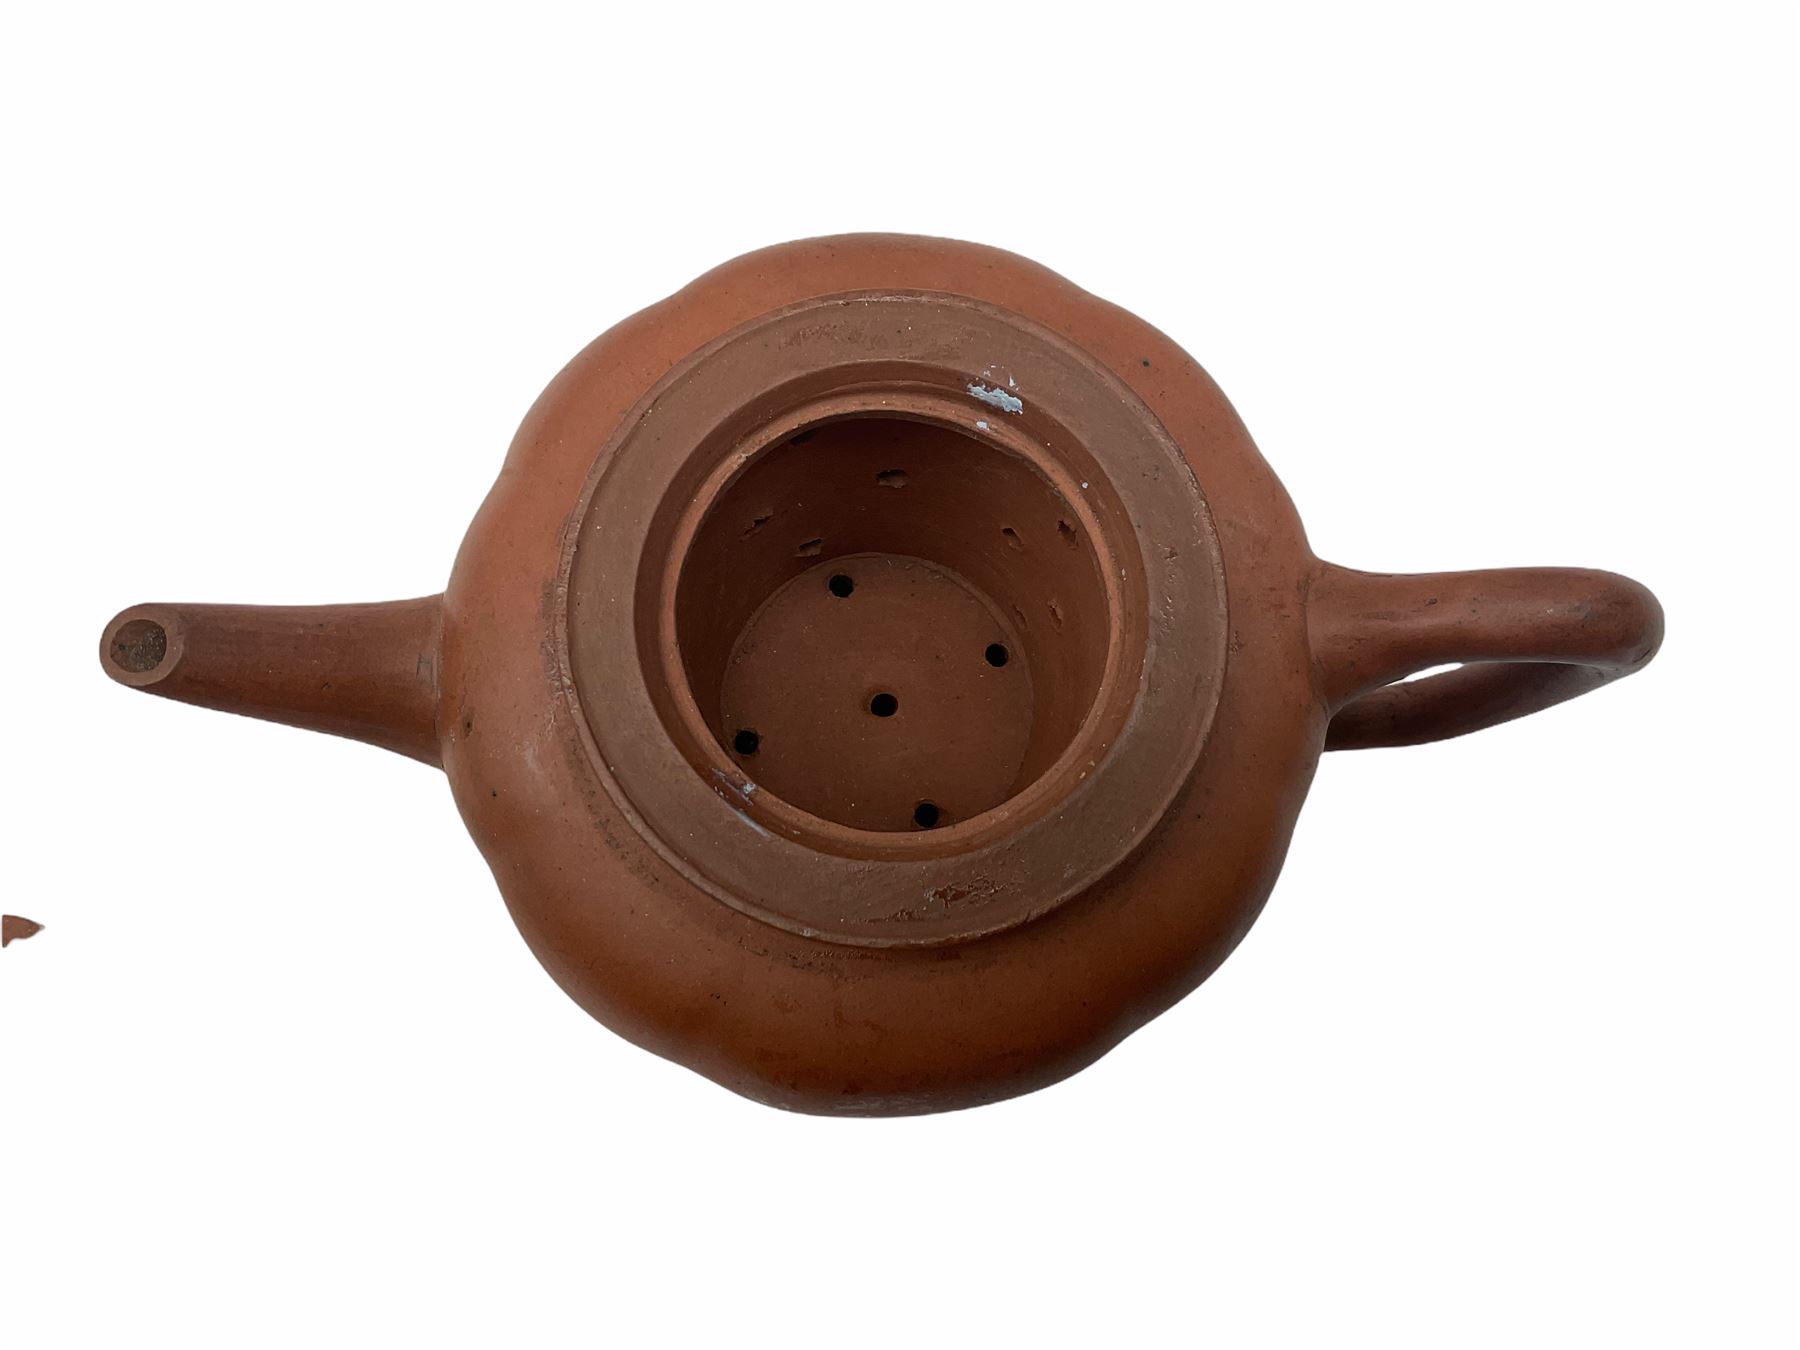 Chinese red terracotta teapot - Image 4 of 6